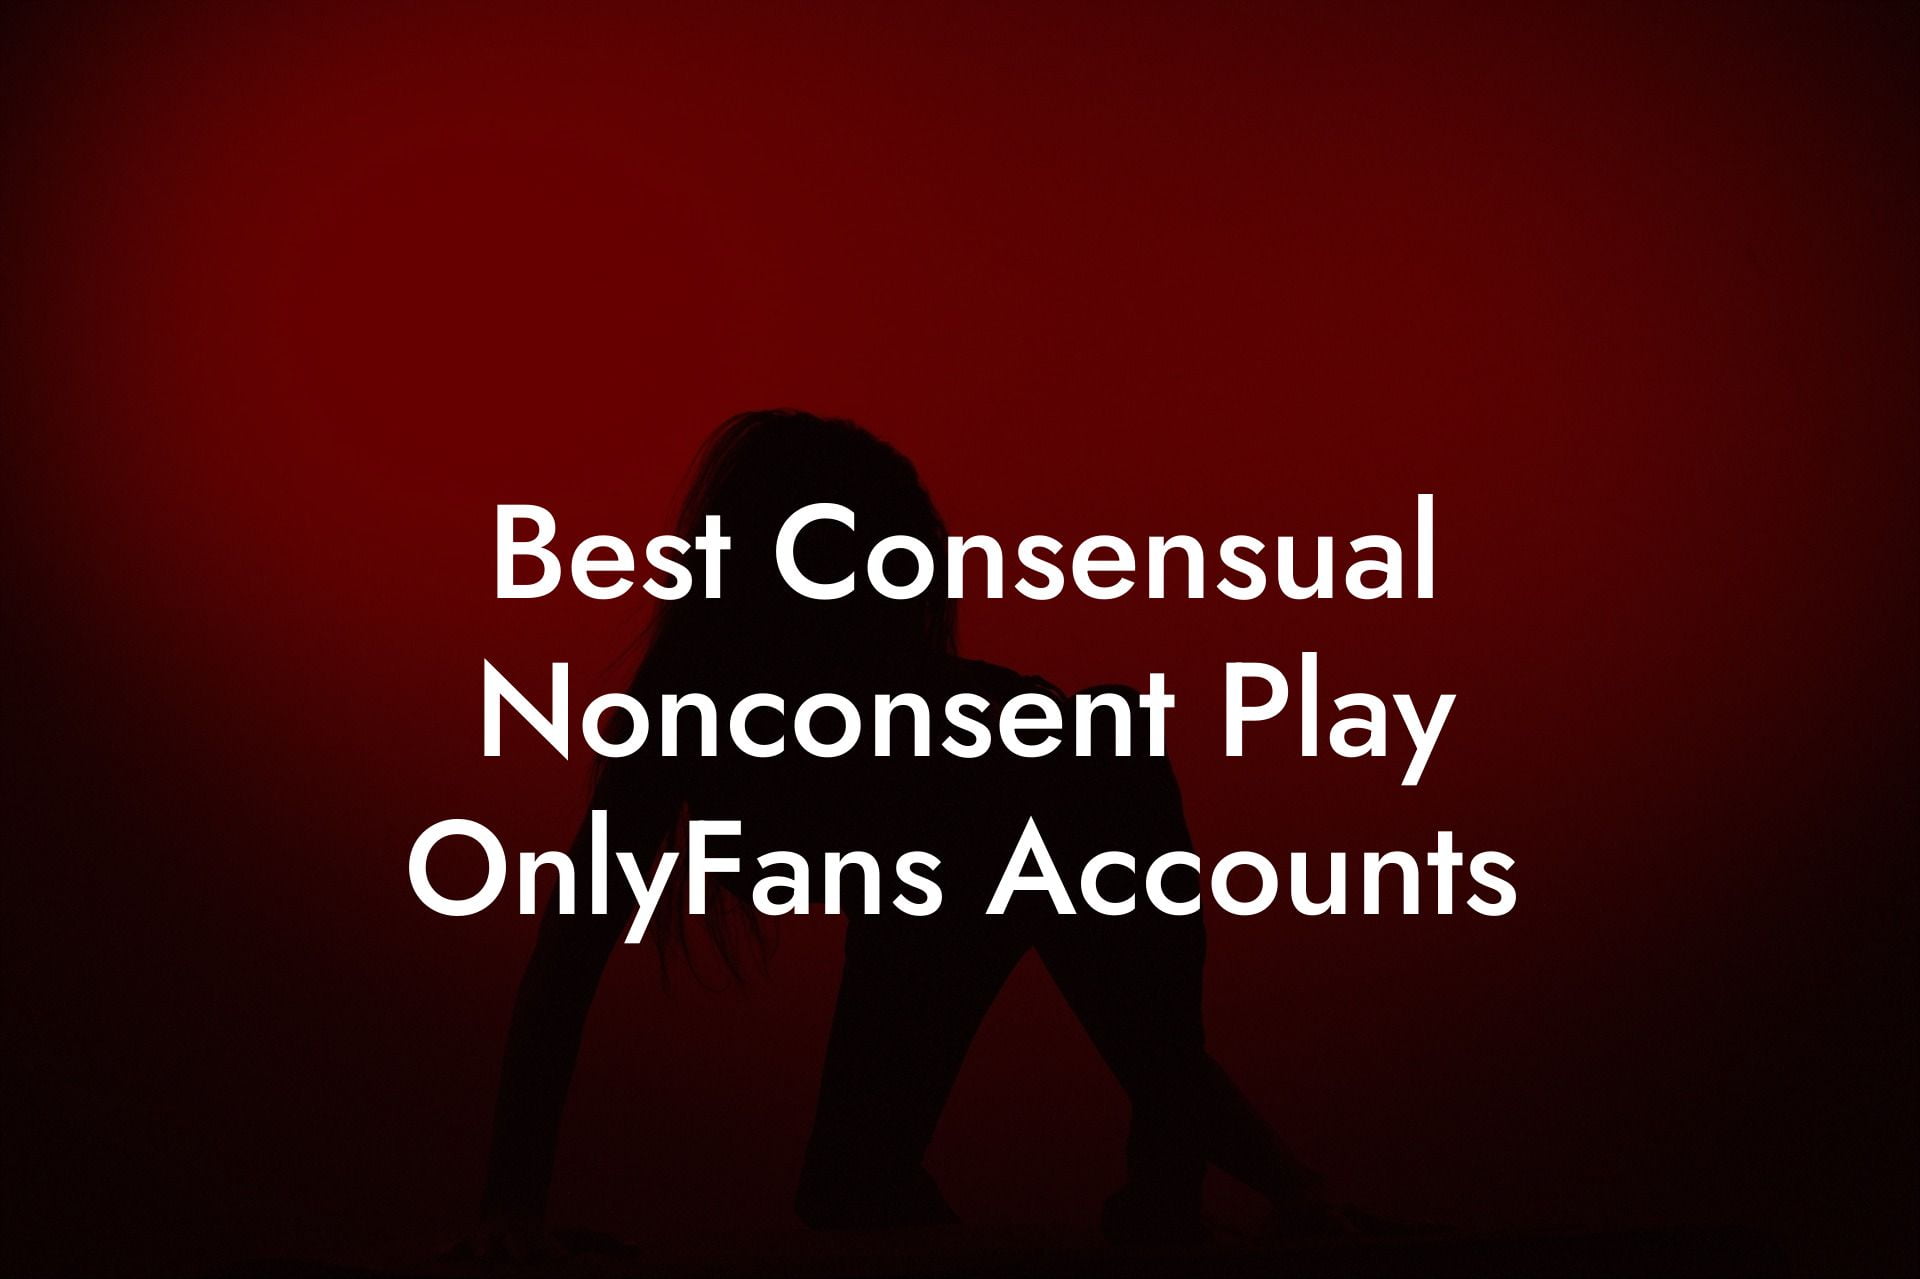 Best Consensual Nonconsent Play OnlyFans Accounts